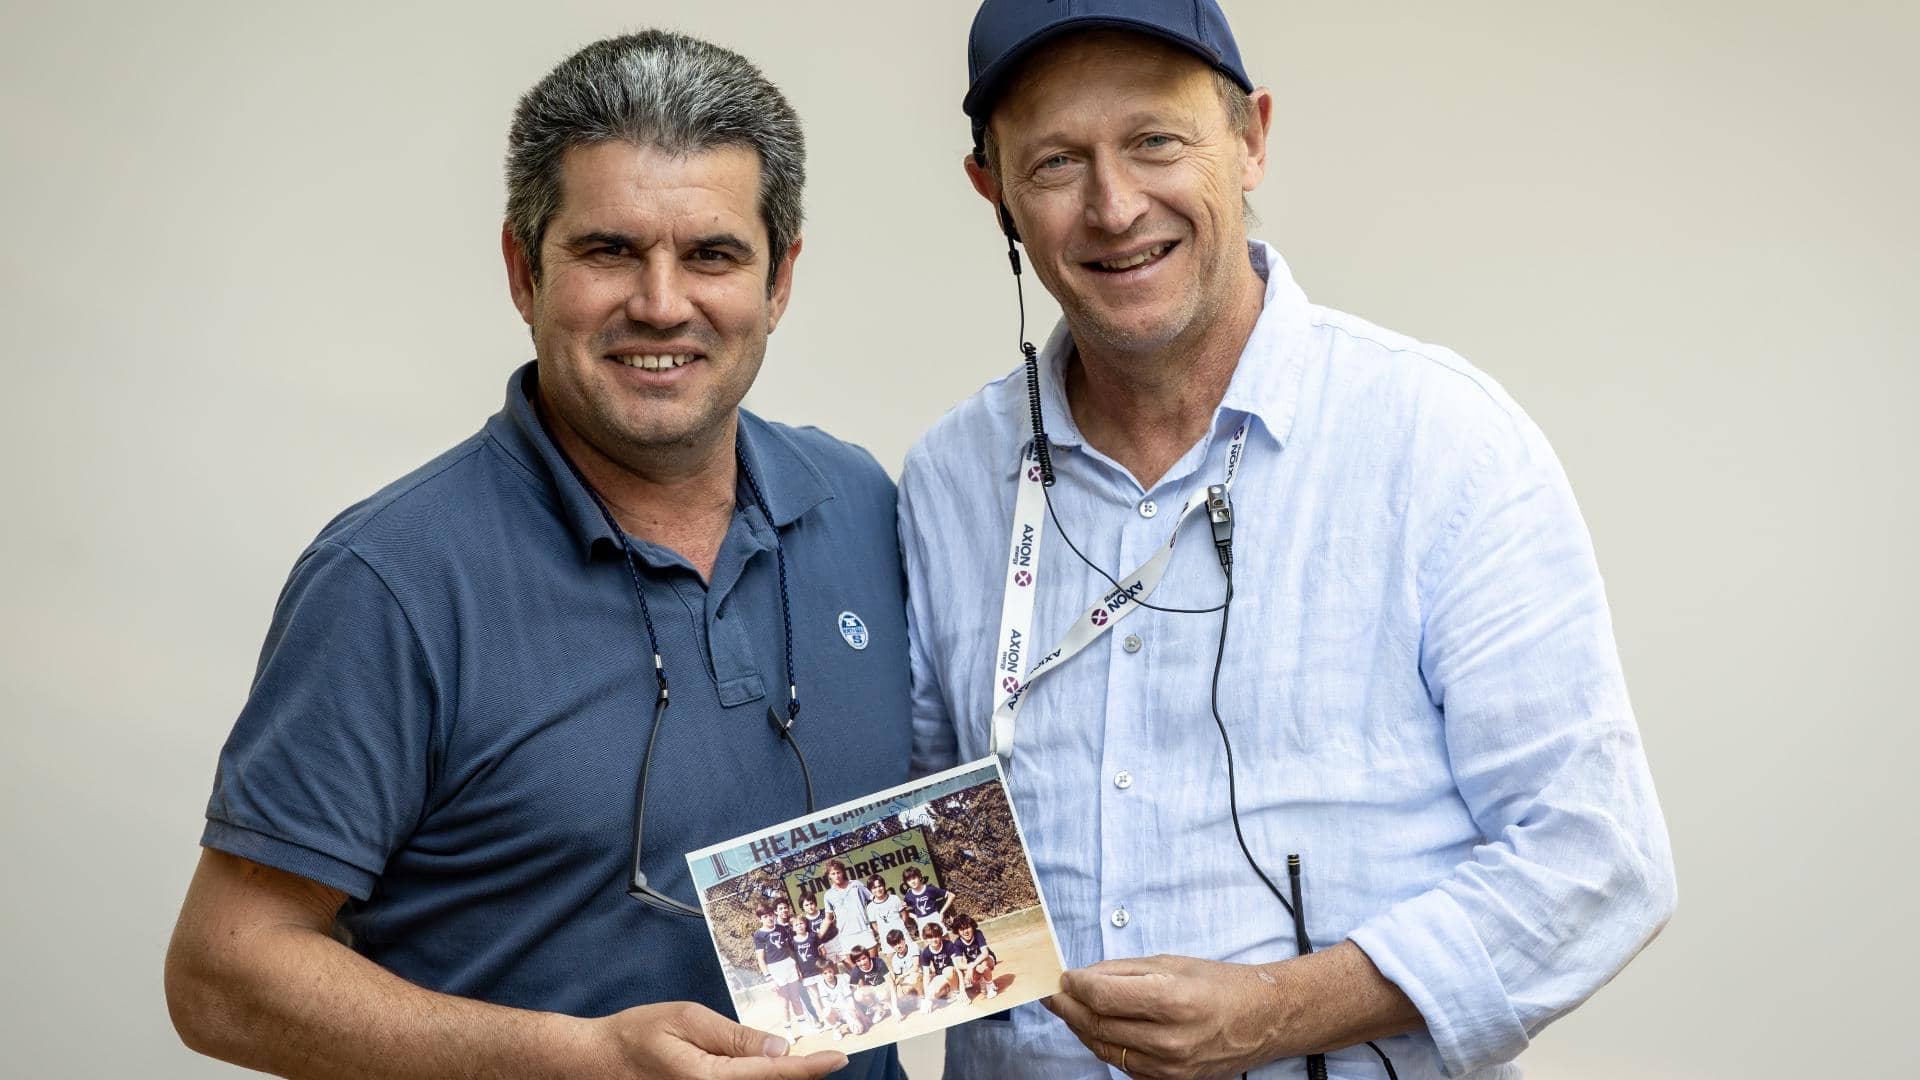 Carlos Alcaraz Sr. surprised Buenos Aires tournament director Martin Jaite with a photo from the latter's playing days.